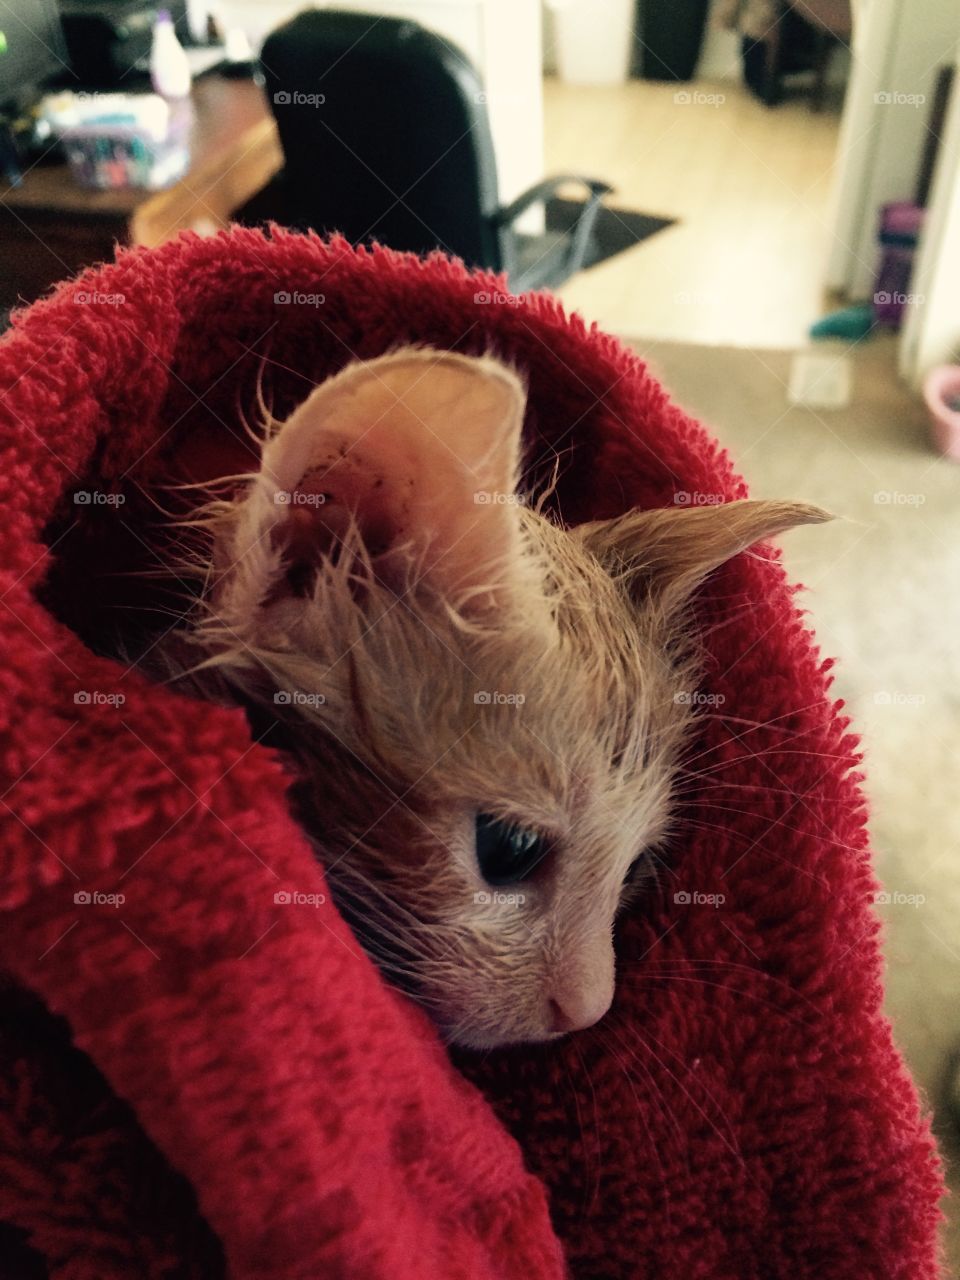 Bath time for kitty. Foster kitten four weeks old just after a bath